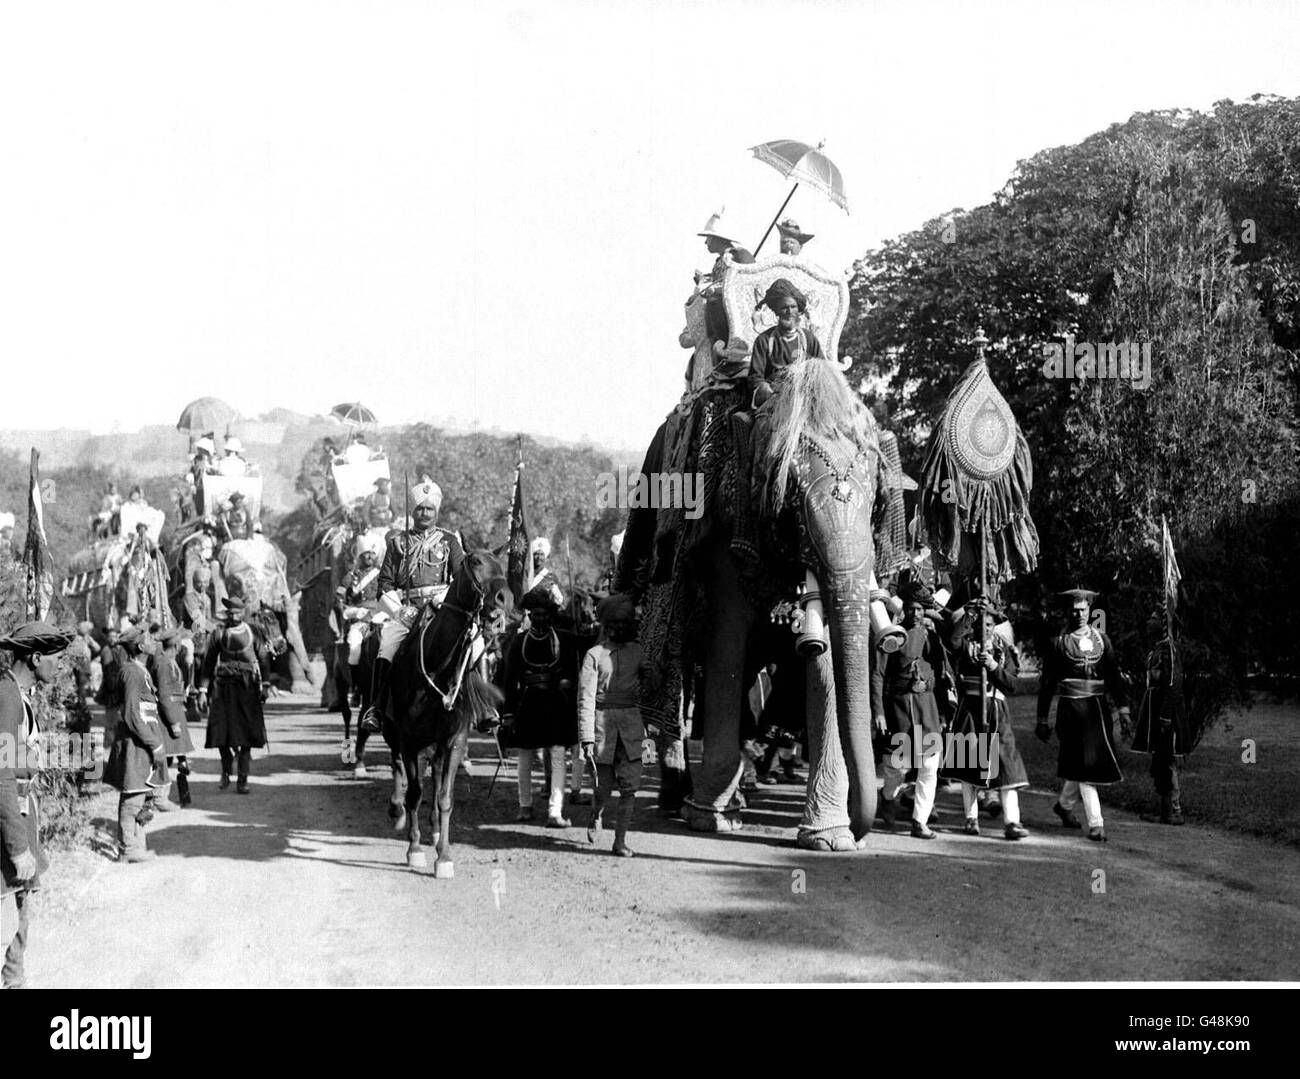 Library filer ref N133, dated 08.2.22 of the Prince and the Maharajah leading the procession of State Elephants. The sun set on scenes like this and on the end of the British Raj in India 50 years ago, at the stroke of midnight on August 14, 1947. But the initial scenes of jubilation across the country quickly turned to horror. Thousands died as battles erupted between Muslims and Hindus in the two new countries of India and Pakistan, created through the partition of the religiously-divided sub-continent. See PA story SOCIAL India. AVAILABLE BLACK & WHITE ONLY. PA Photo Stock Photo